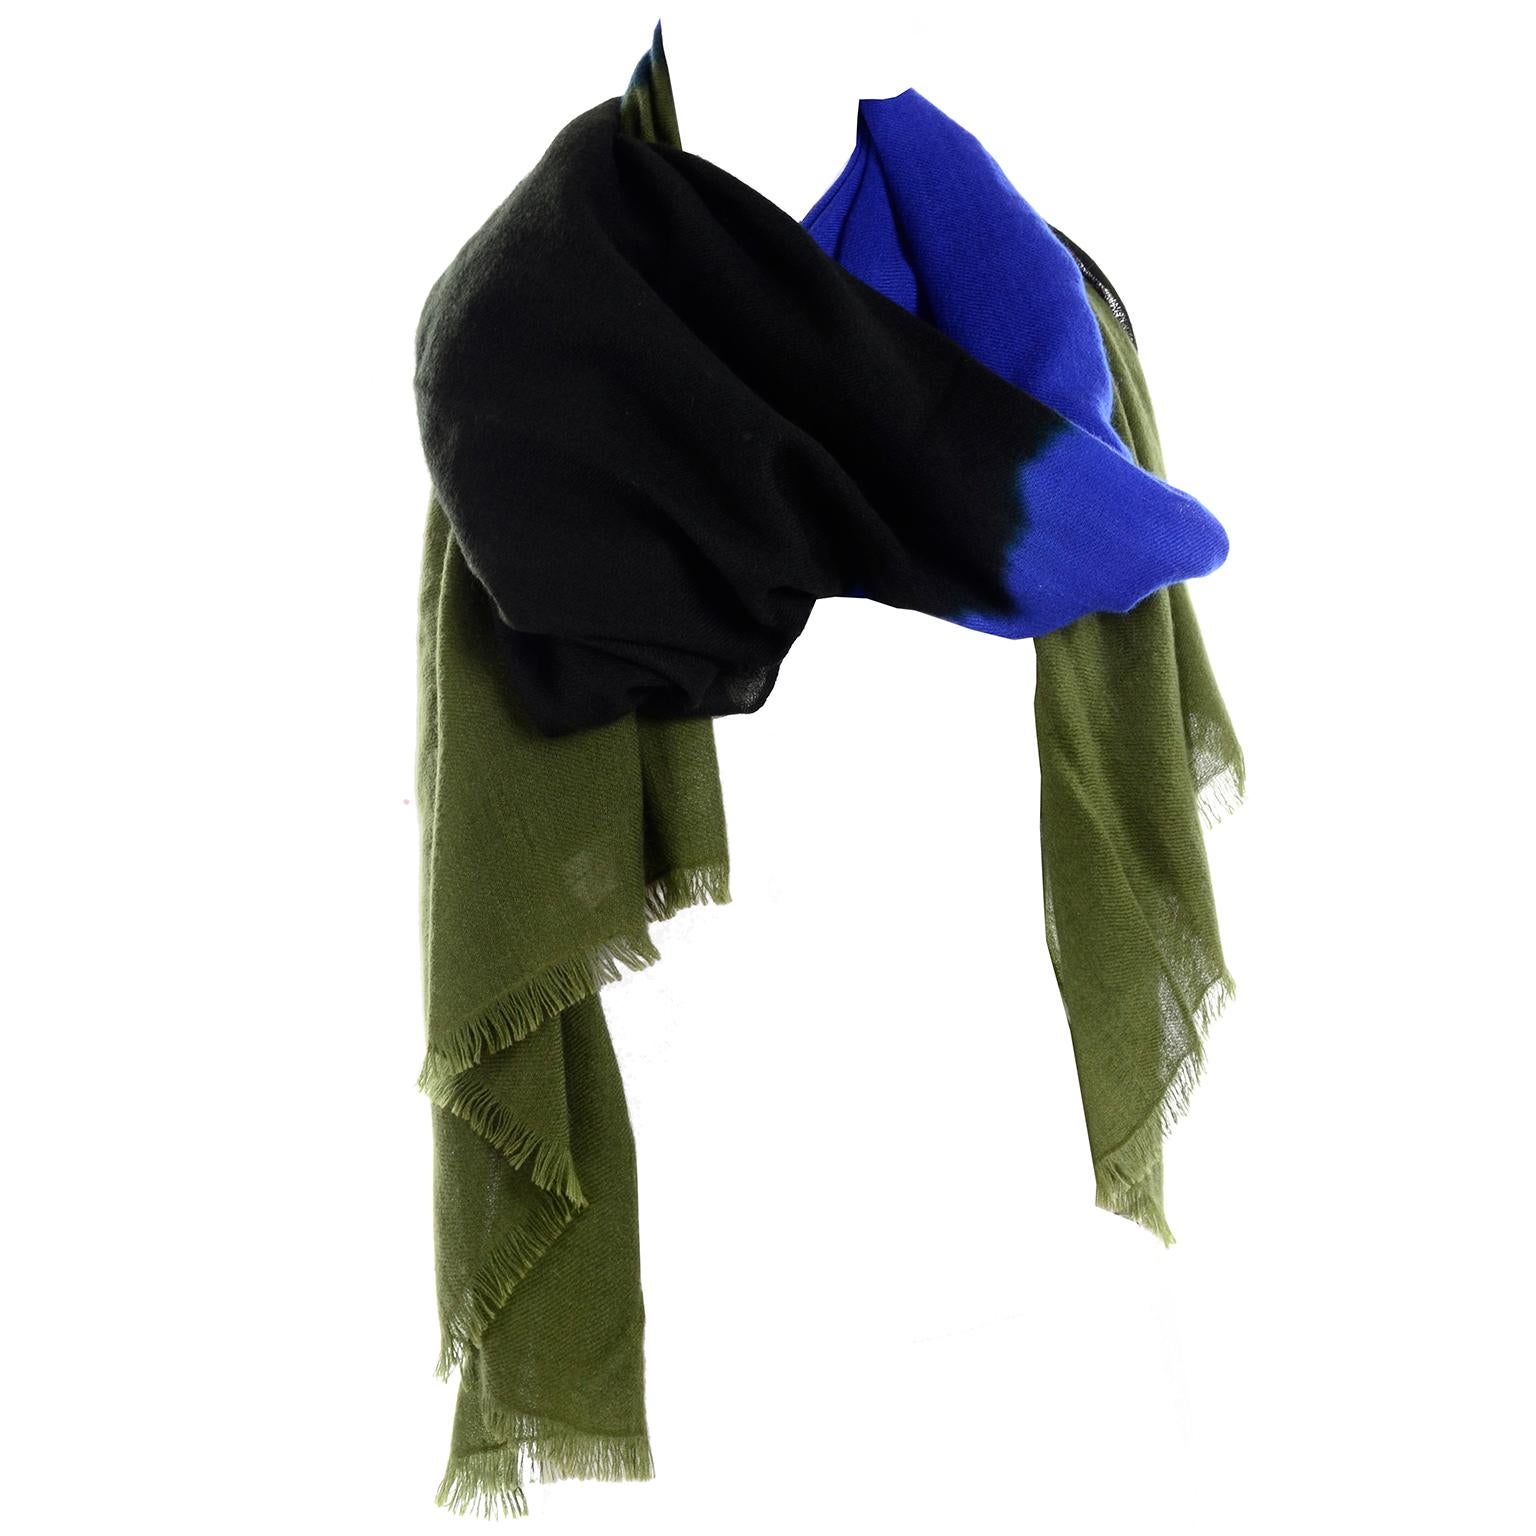 This is such an  incredible 100% cashmere scarf or wrap that was designed by Oscar de la Renta. The scarf was never worn and is in color blocks of Green, black and blue. This lovely piece can be worn as a scarf, wrap or stole and measures 34 X 80